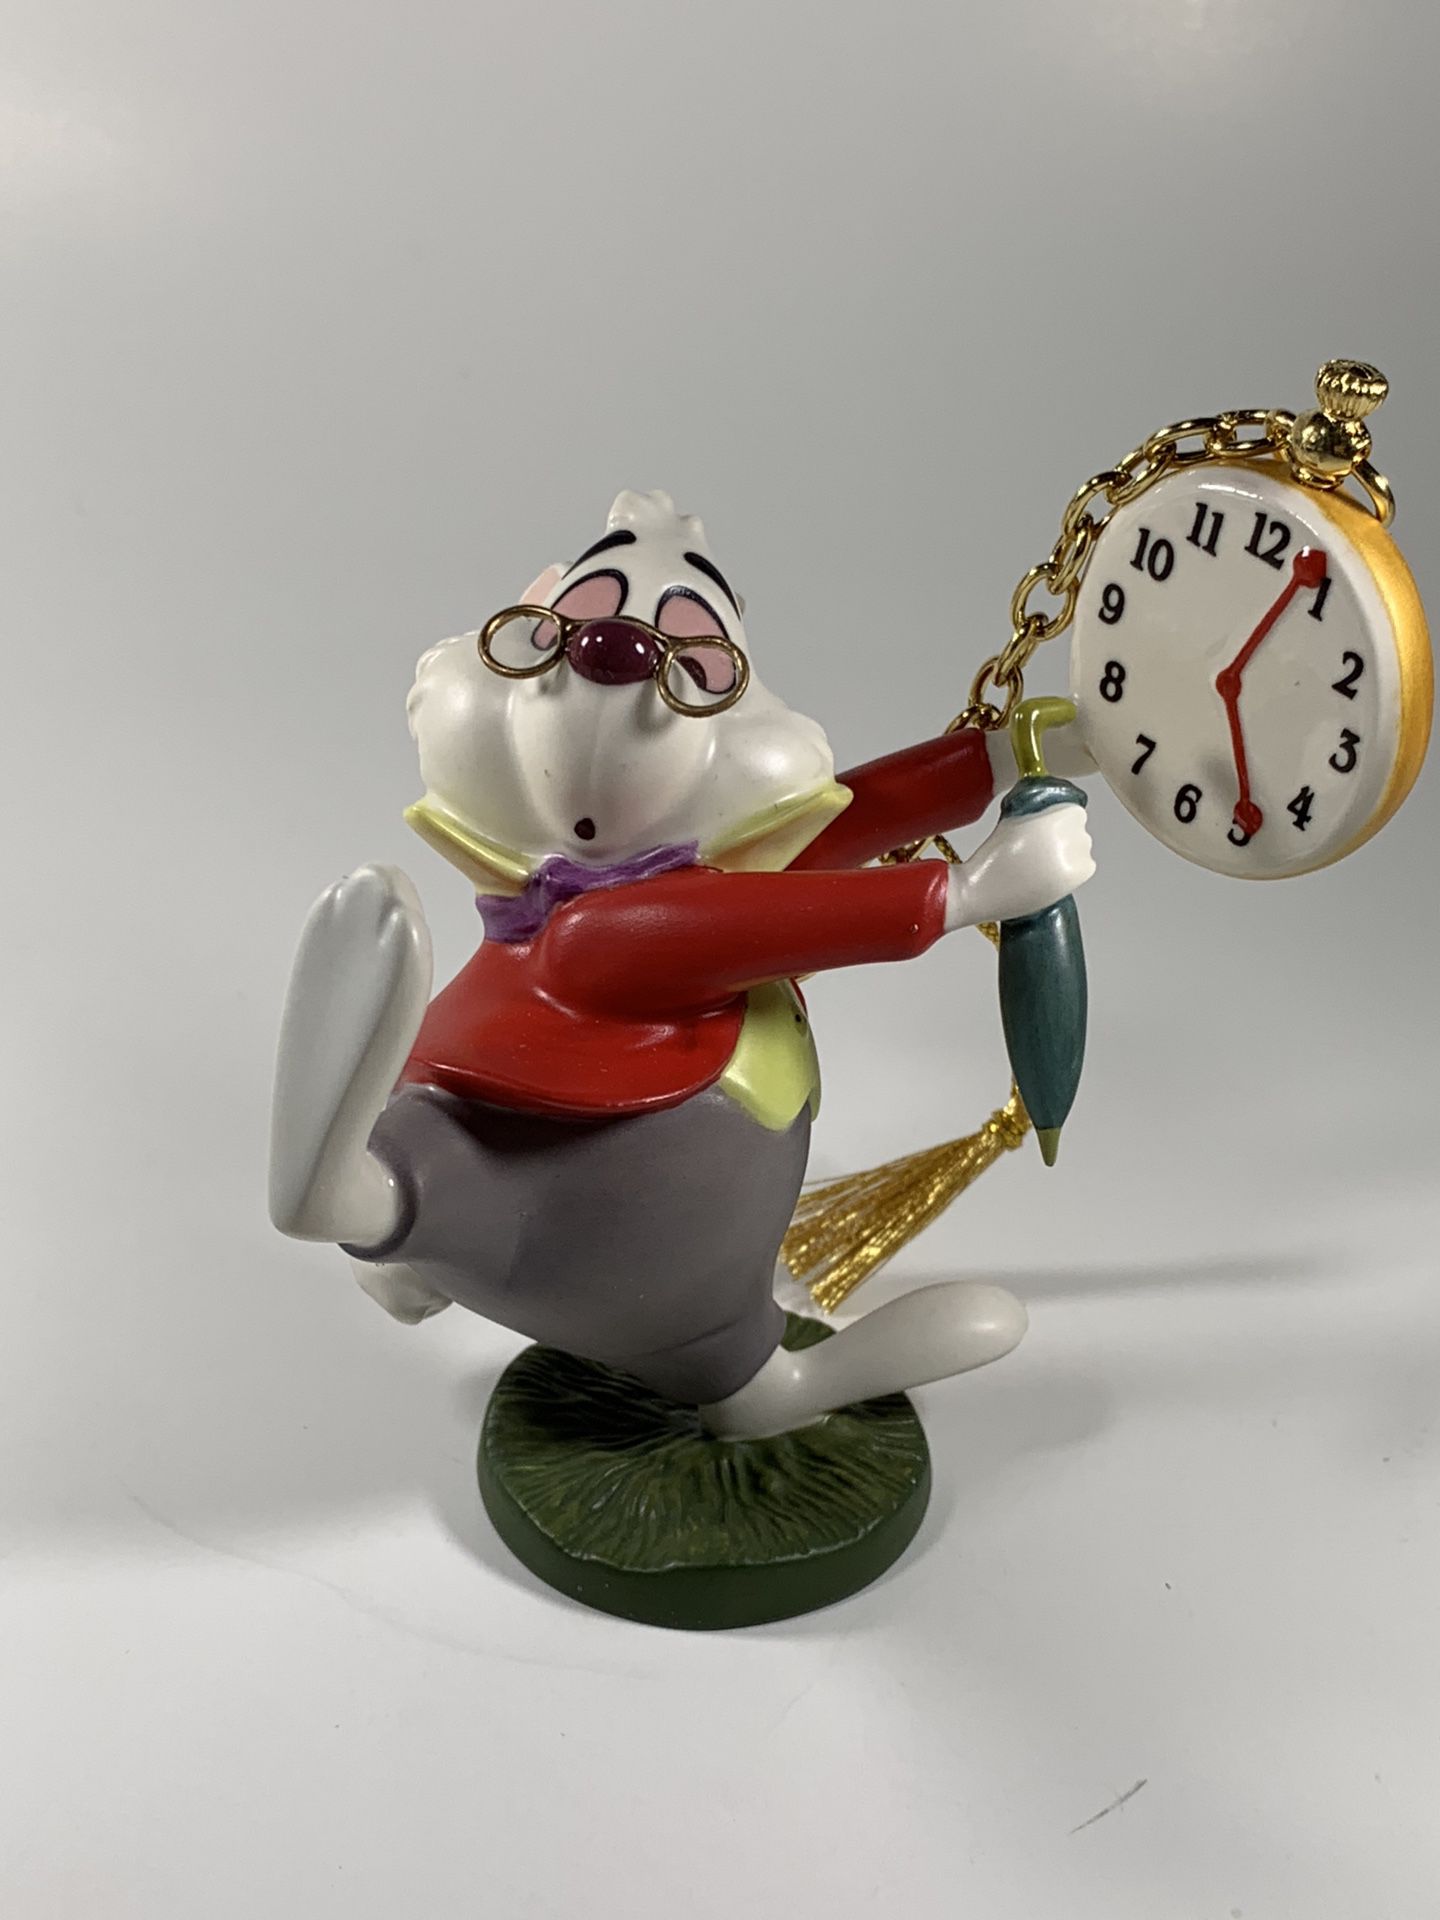 Walt Disney Classics Collection Alice in Wonderland white rabbit ornament “No time to say hello-goodbye”. Along with Certificate of Authenticity. Hav